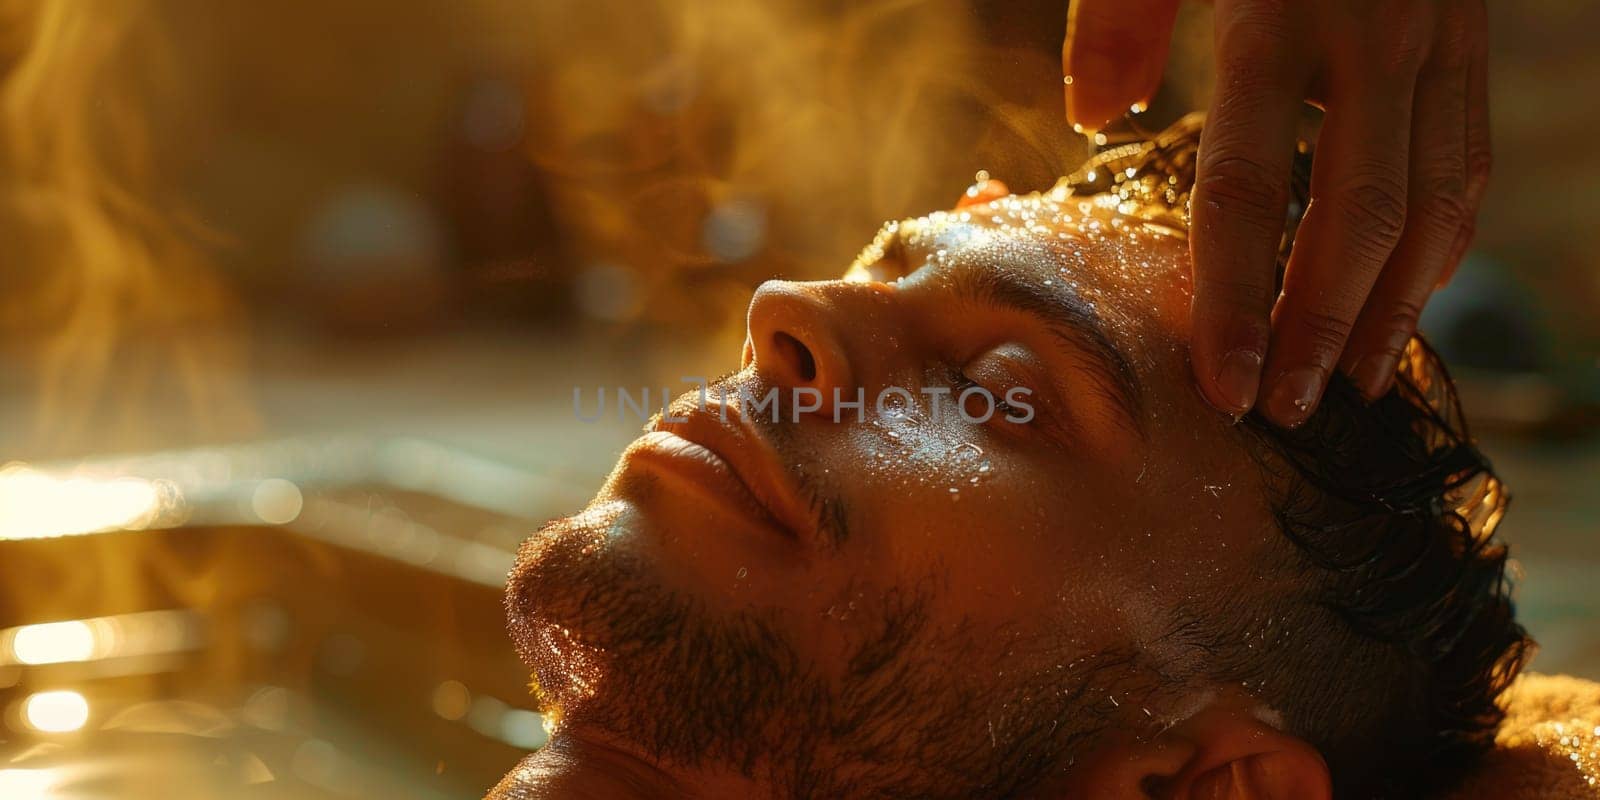 Man Having Hair Washed in Bath by but_photo